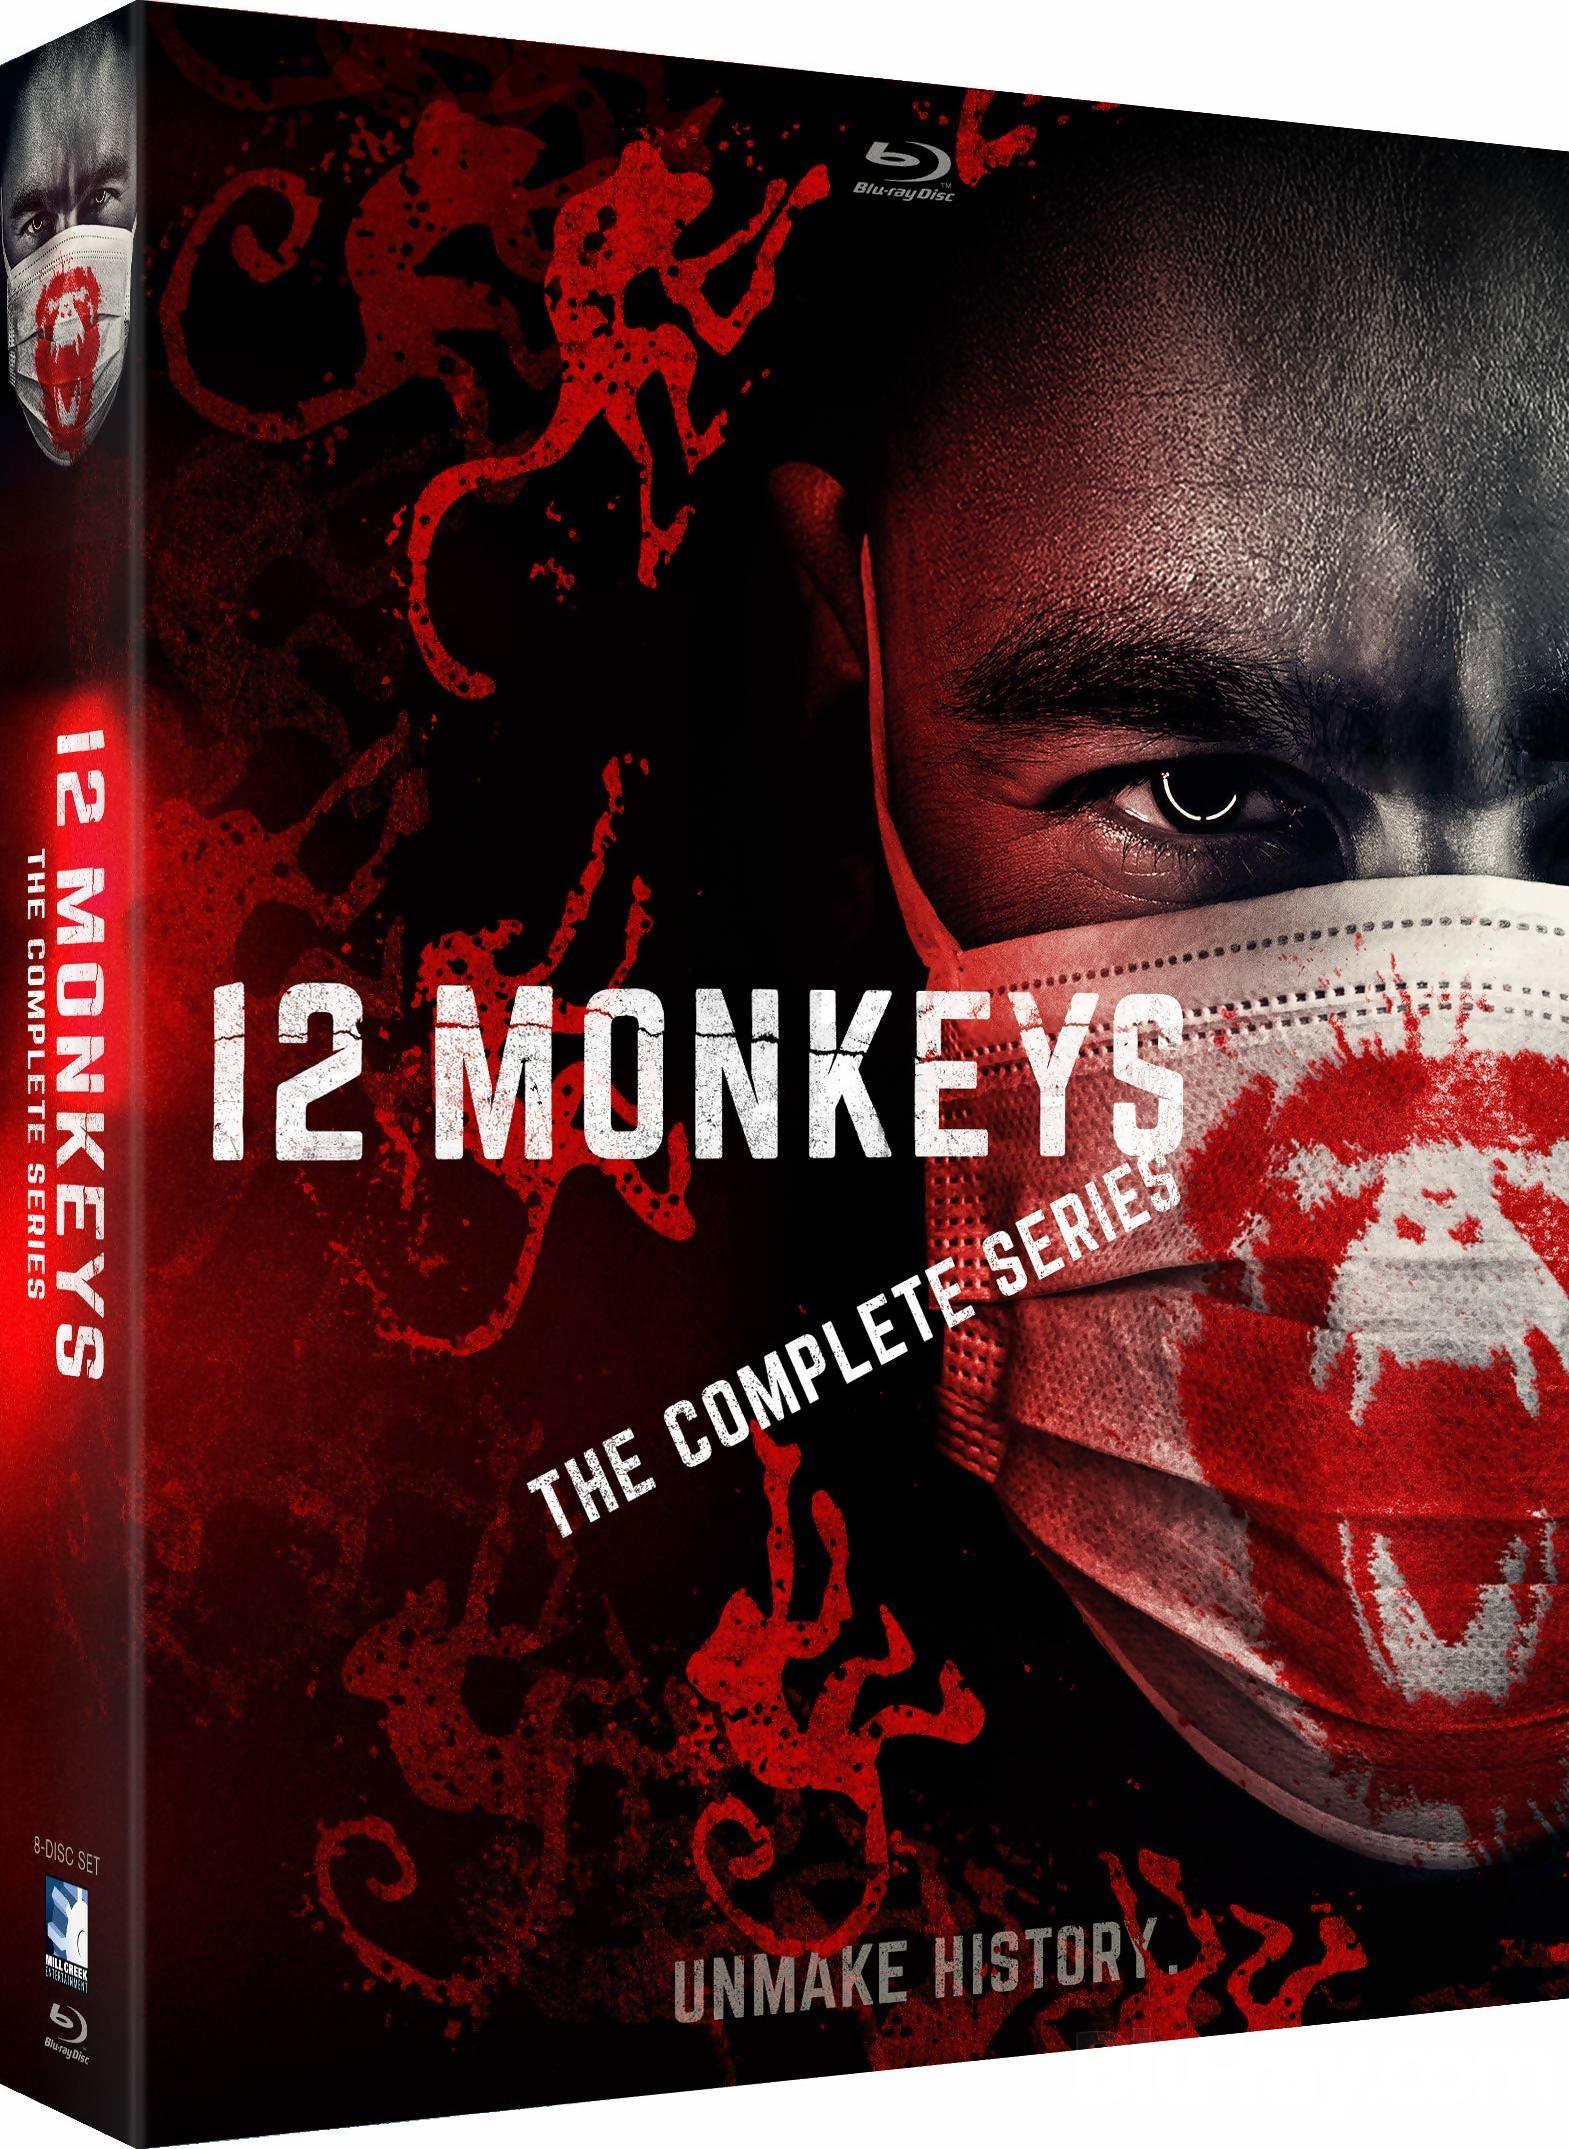 12 Monkeys: The Complete Series Blu-ray